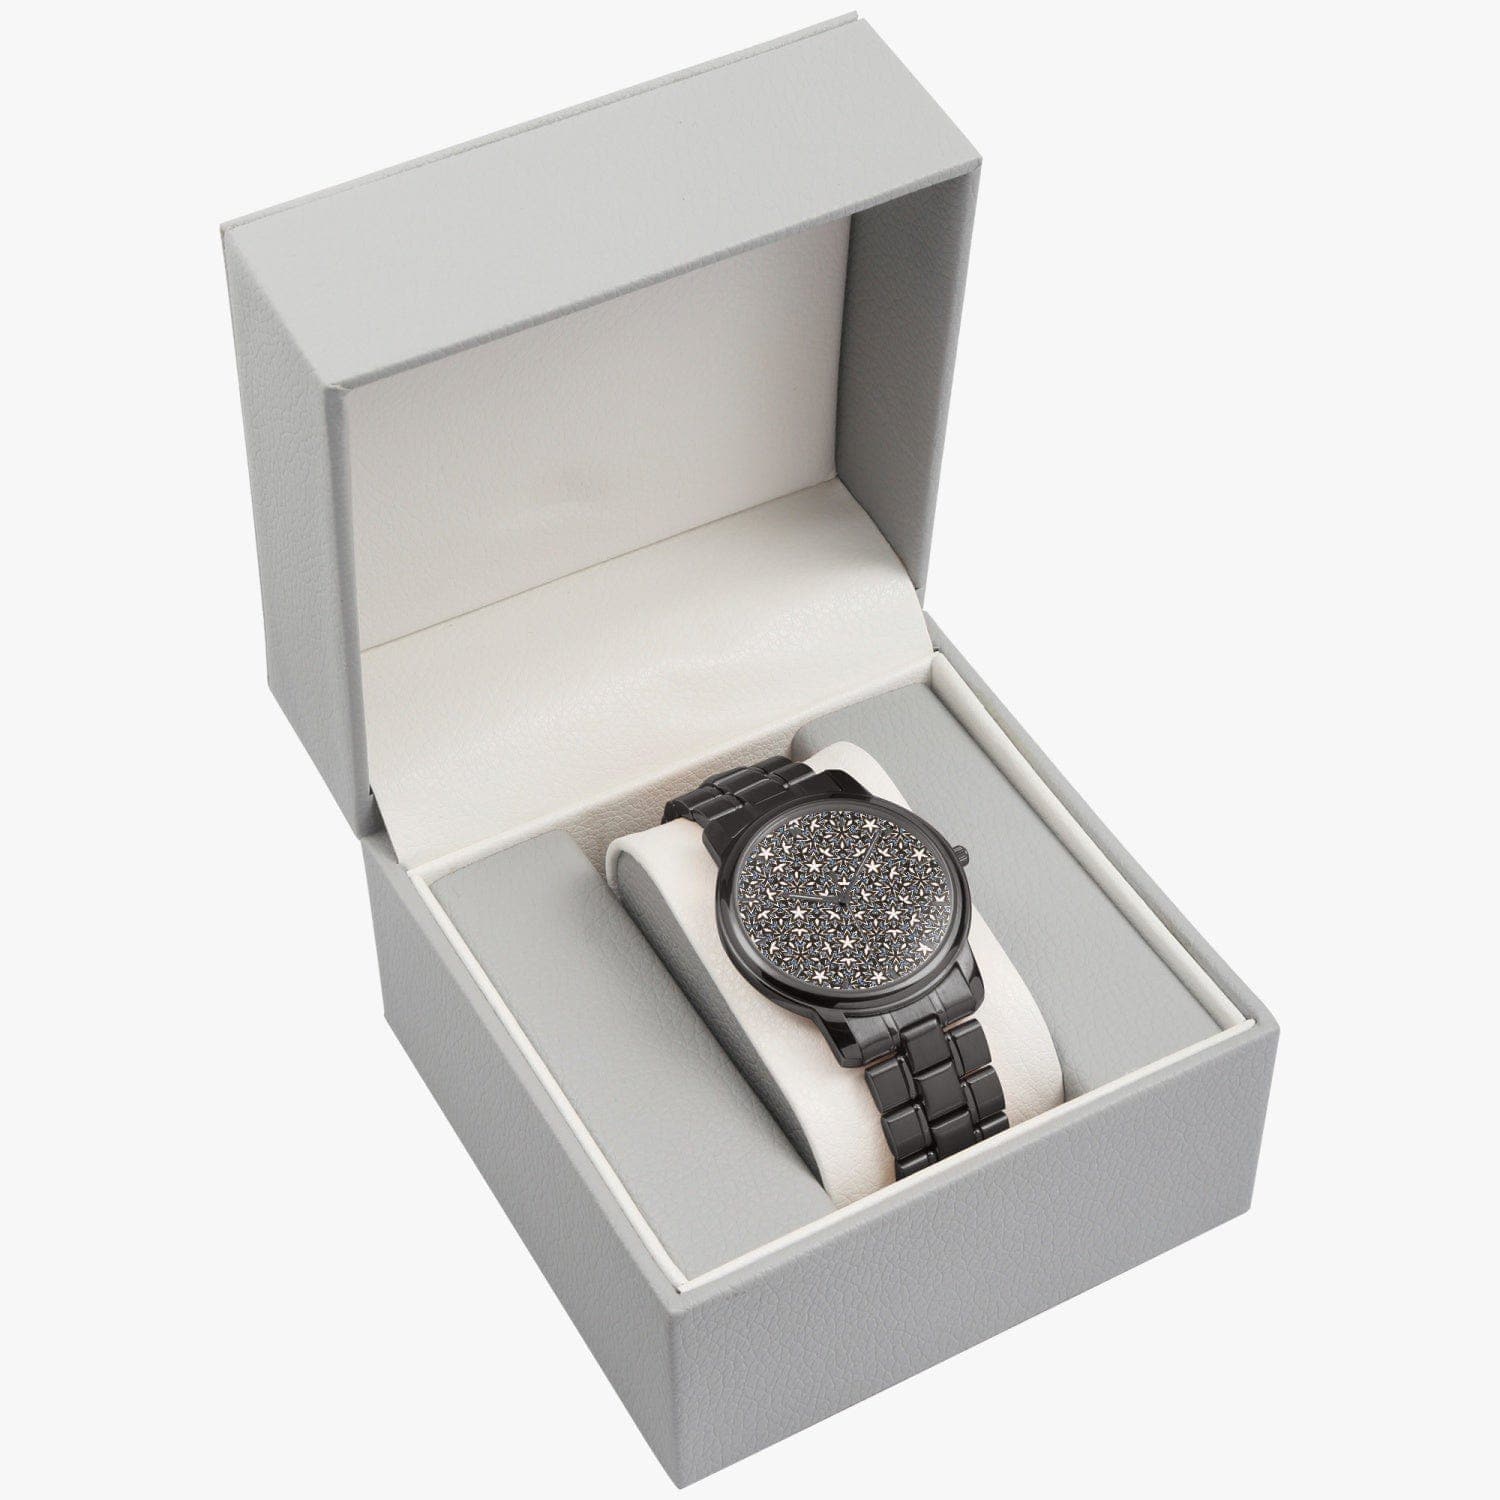 Mountain and snow pattern, Folding Clasp Type Stainless Steel Quartz Watch, desgined by Sensus Studio Design